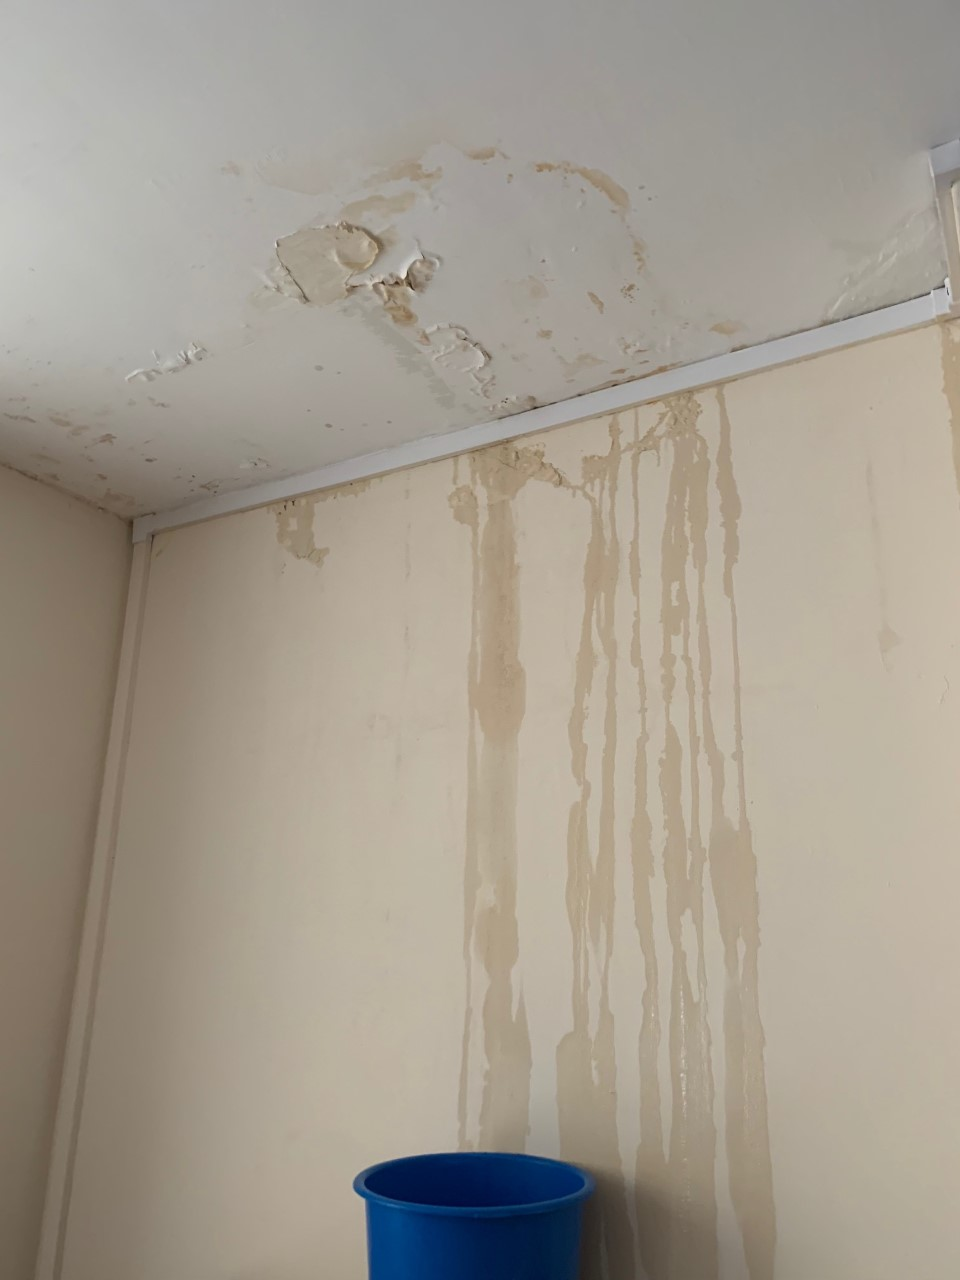 picture showing water damage